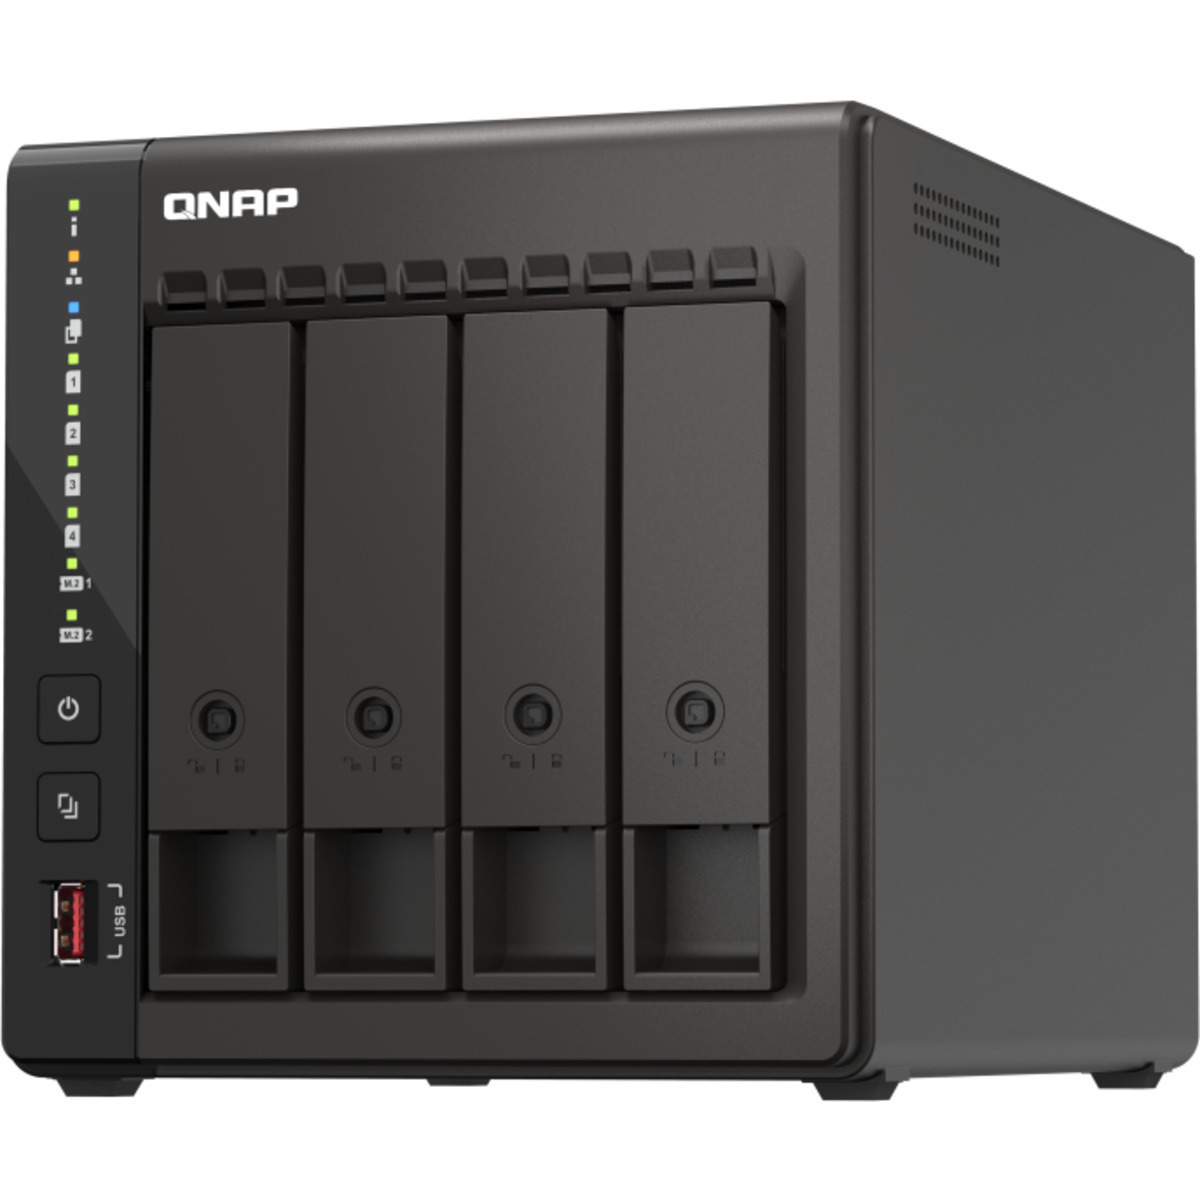 QNAP TS-453E 8tb 4-Bay Desktop Multimedia / Power User / Business NAS - Network Attached Storage Device 4x2tb Crucial MX500 CT2000MX500SSD1 2.5 560/510MB/s SATA 6Gb/s SSD CONSUMER Class Drives Installed - Burn-In Tested TS-453E